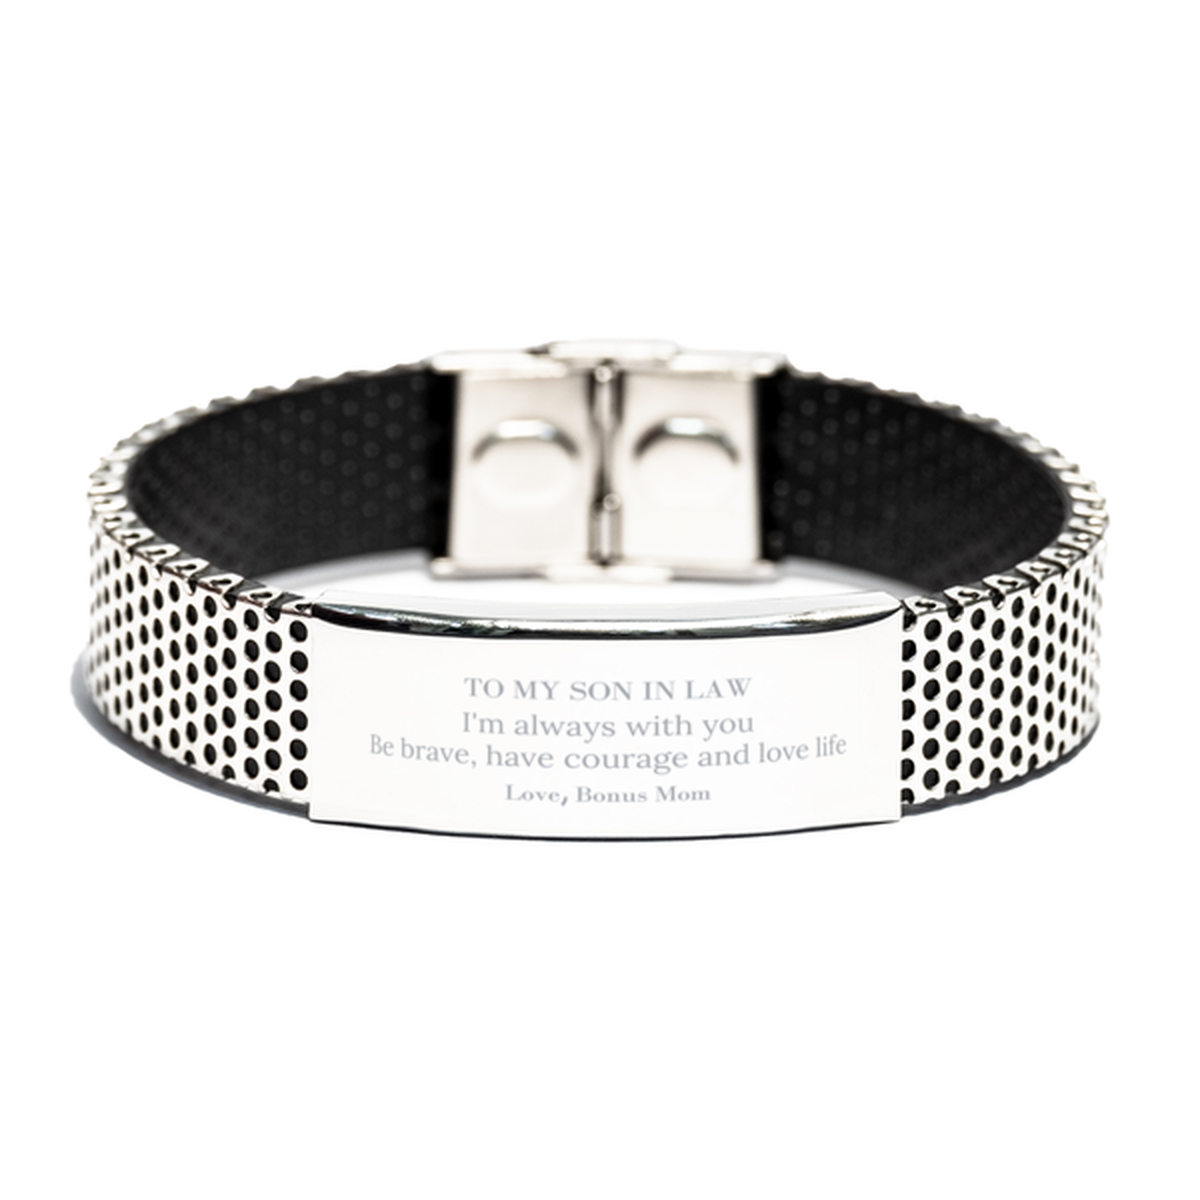 To My Son In Law Gifts from Bonus Mom, Unique Stainless Steel Bracelet Inspirational Christmas Birthday Graduation Gifts for Son In Law I'm always with you. Be brave, have courage and love life. Love, Bonus Mom